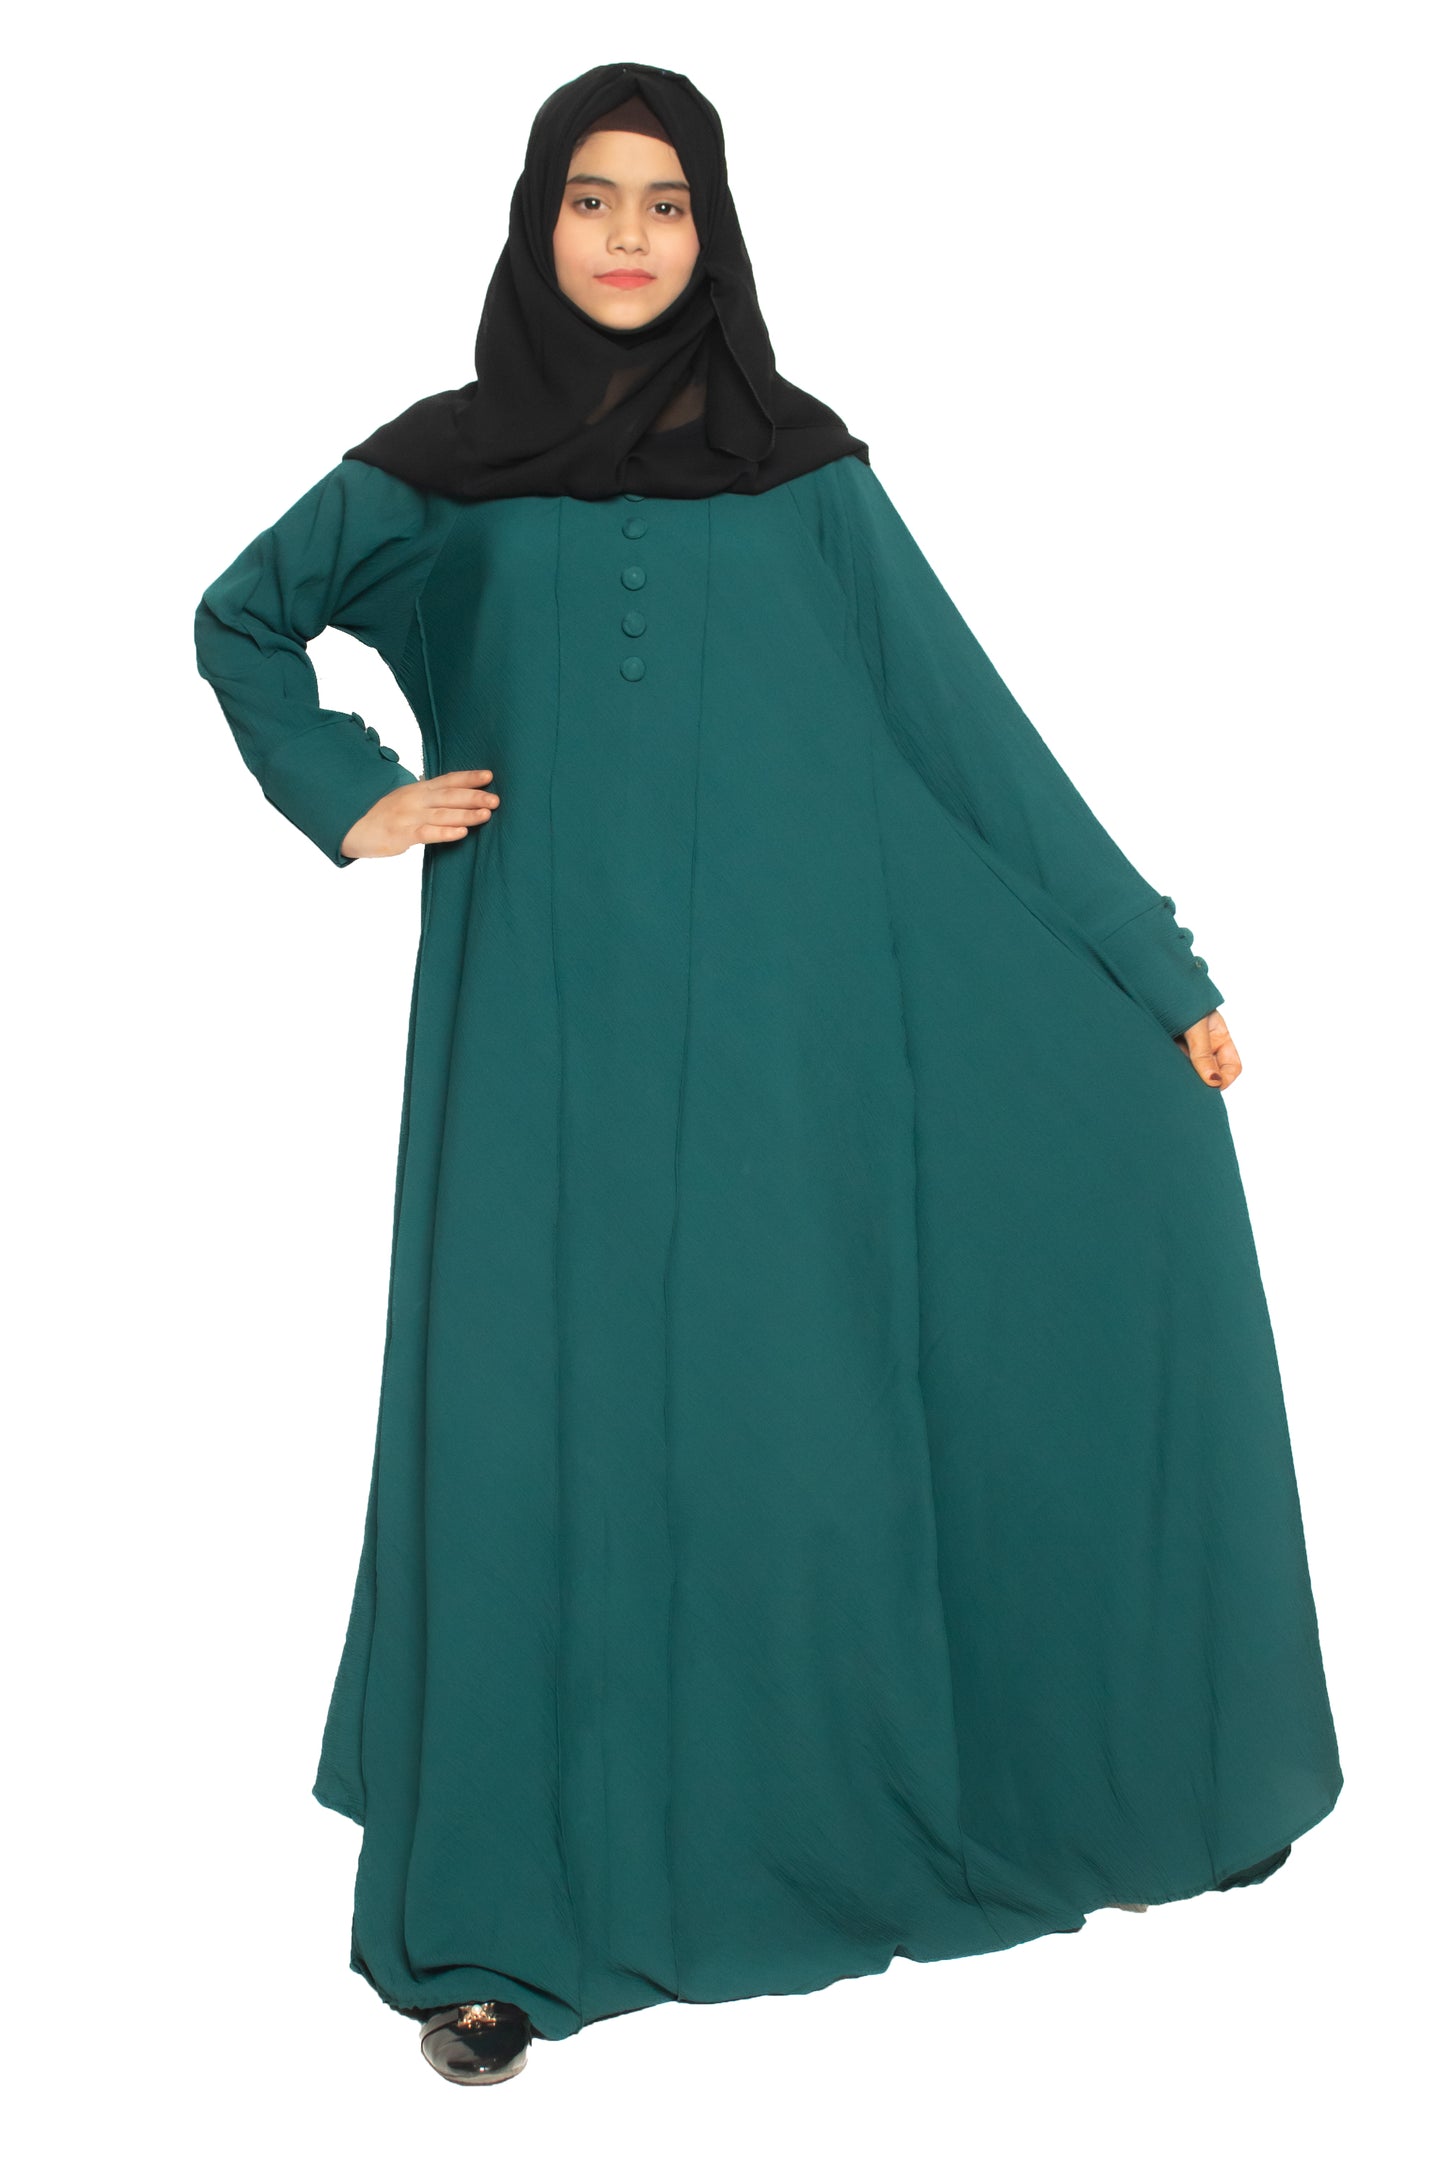 Modest City Self Design Plain Bottle Green Front 4 Button Abaya or Burqa With Hijab for Women & Girls-Series Laiba